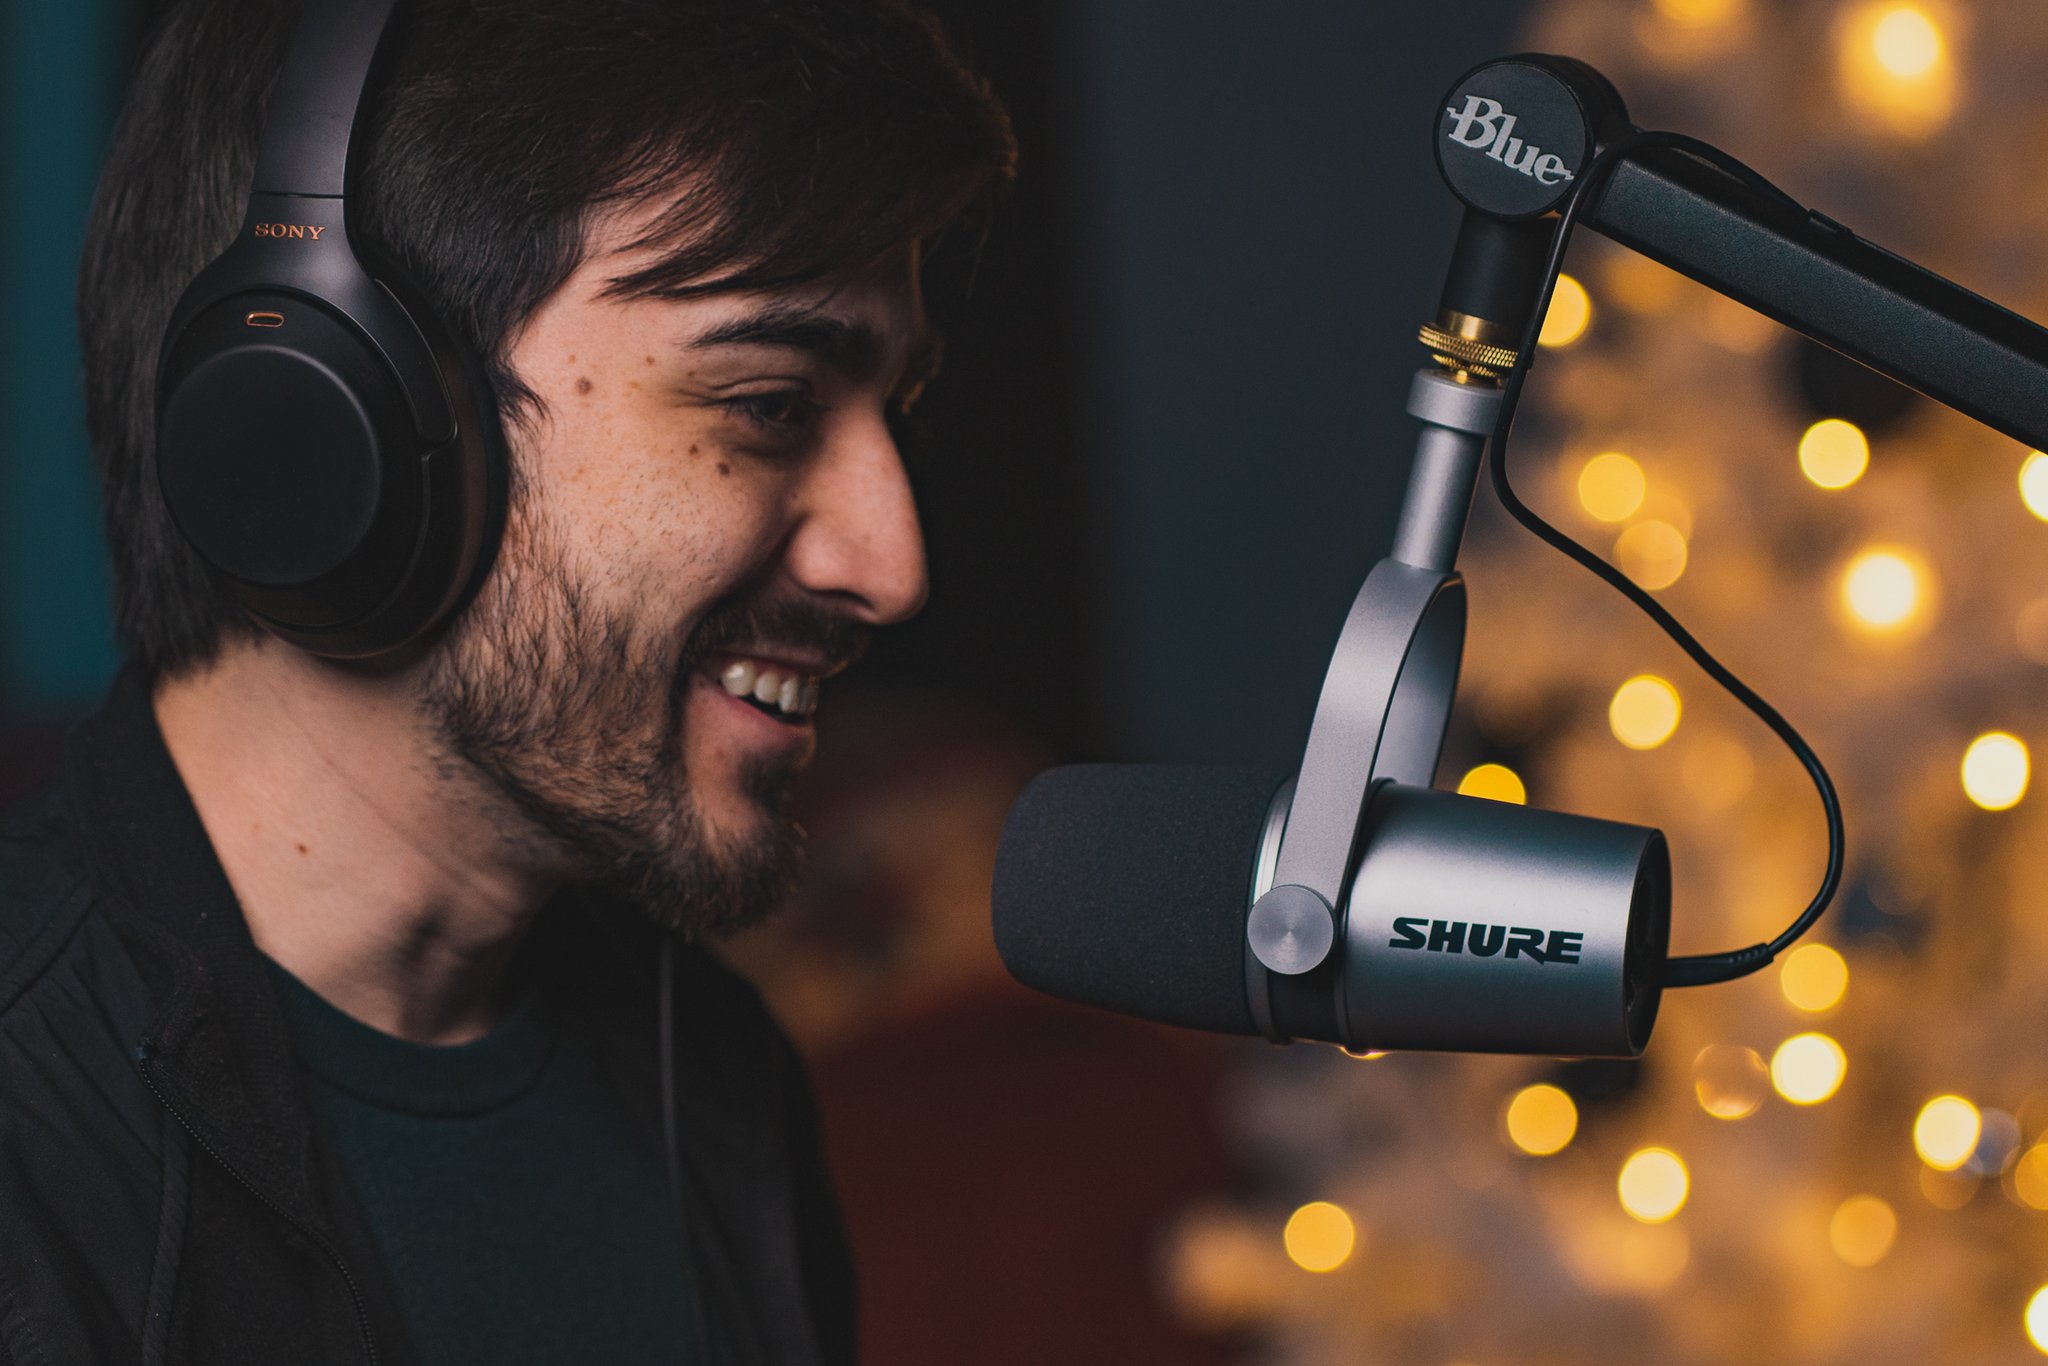 Podcasting with the Shure MV7